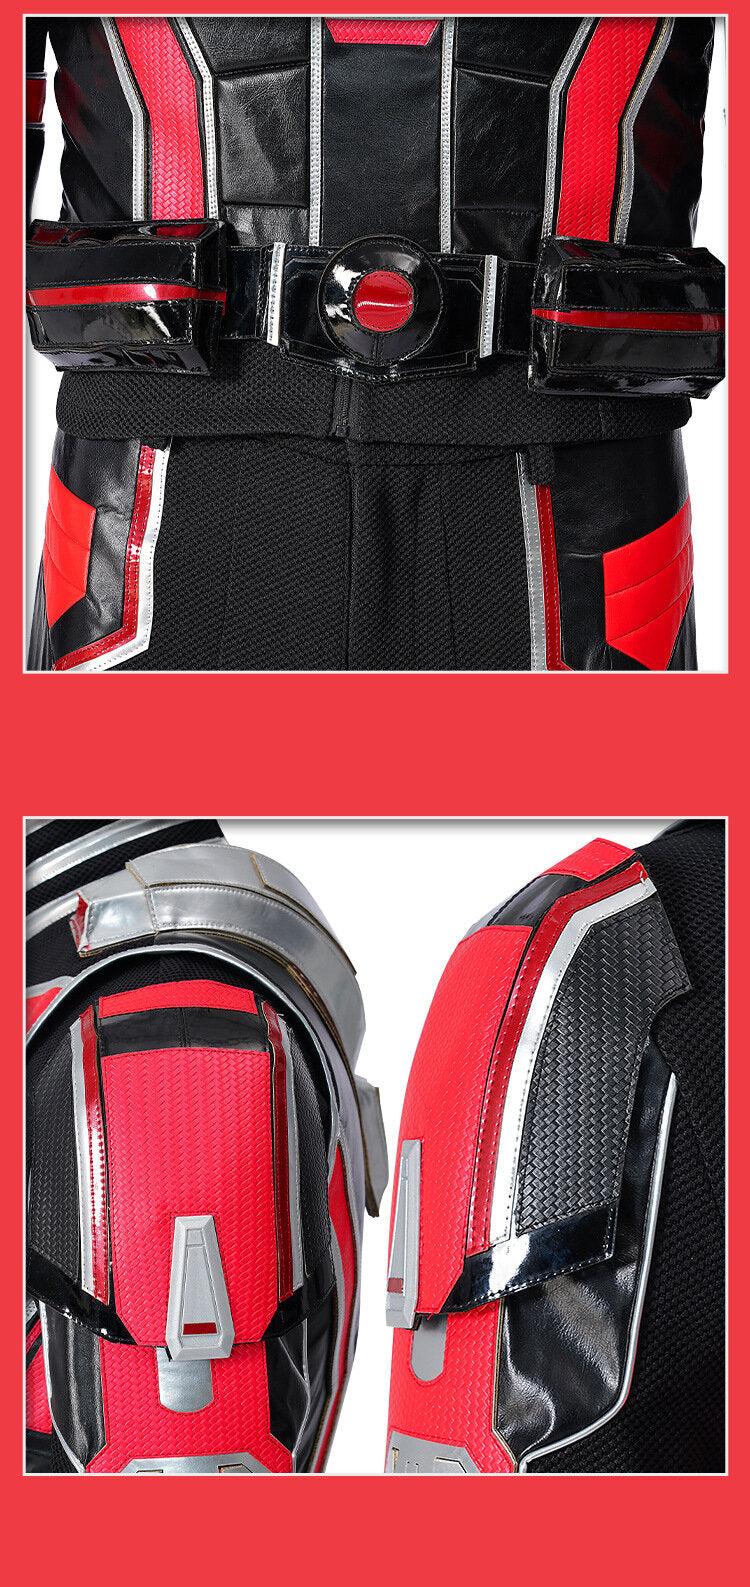 Mens Antman Cosplay Costume. Antman and the Wasp Quantumania